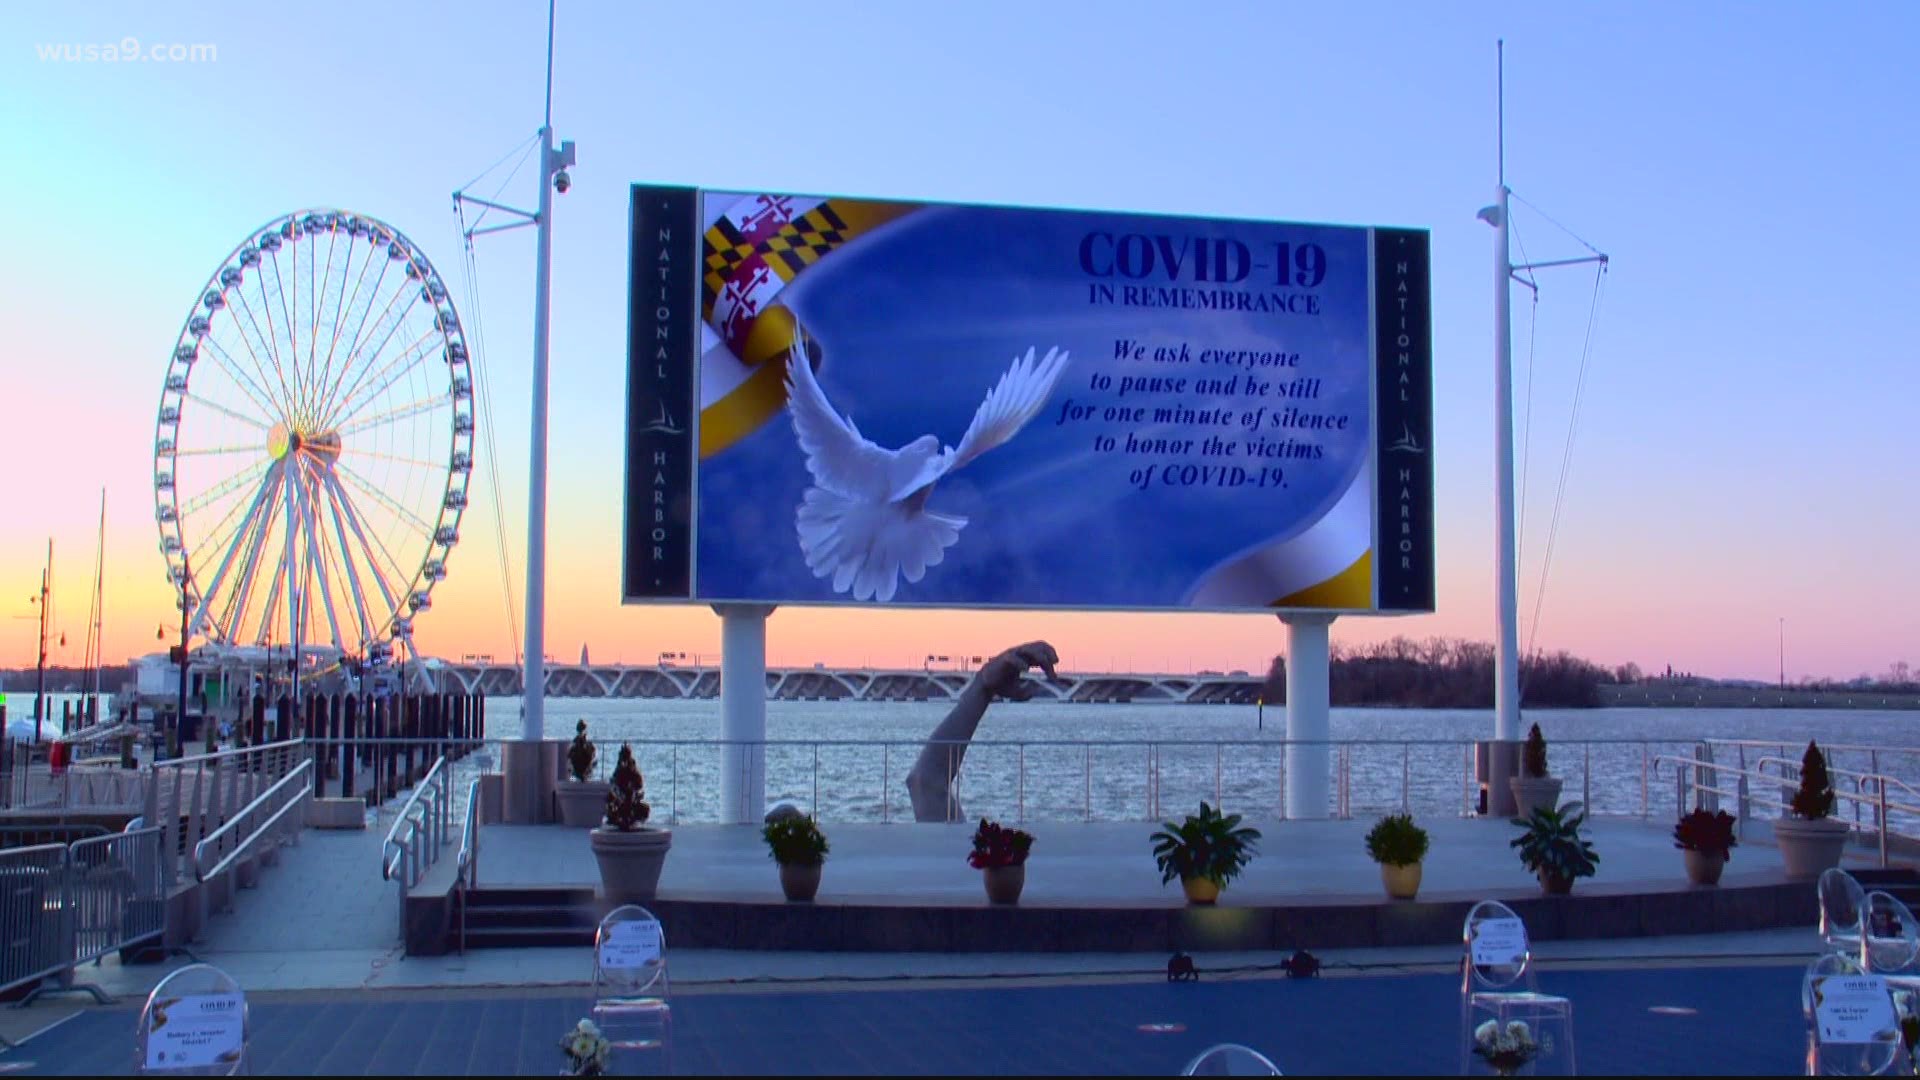 Prince George’s County took time Friday night to remember its 1,300 residents who have lost their lives to coronavirus, with a tribute video shown at National Harbor